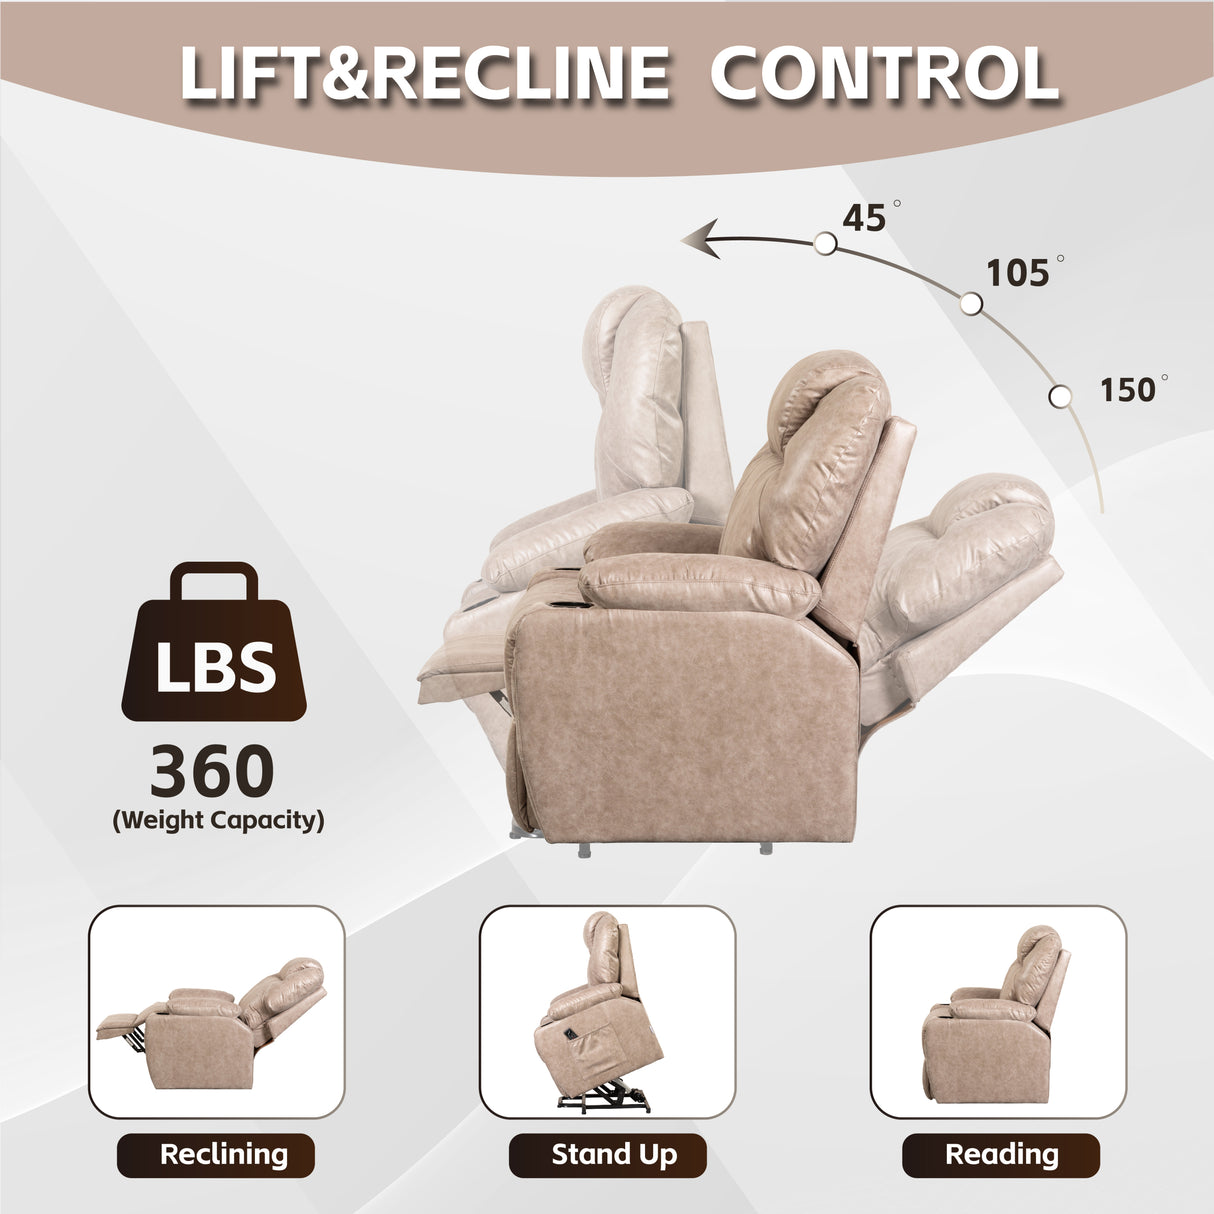 Lehboson Lift Chair Recliners, Electric Power Recliner Chair Sofa for Elderly, (Beige) Massage and Heat Home Elegance USA